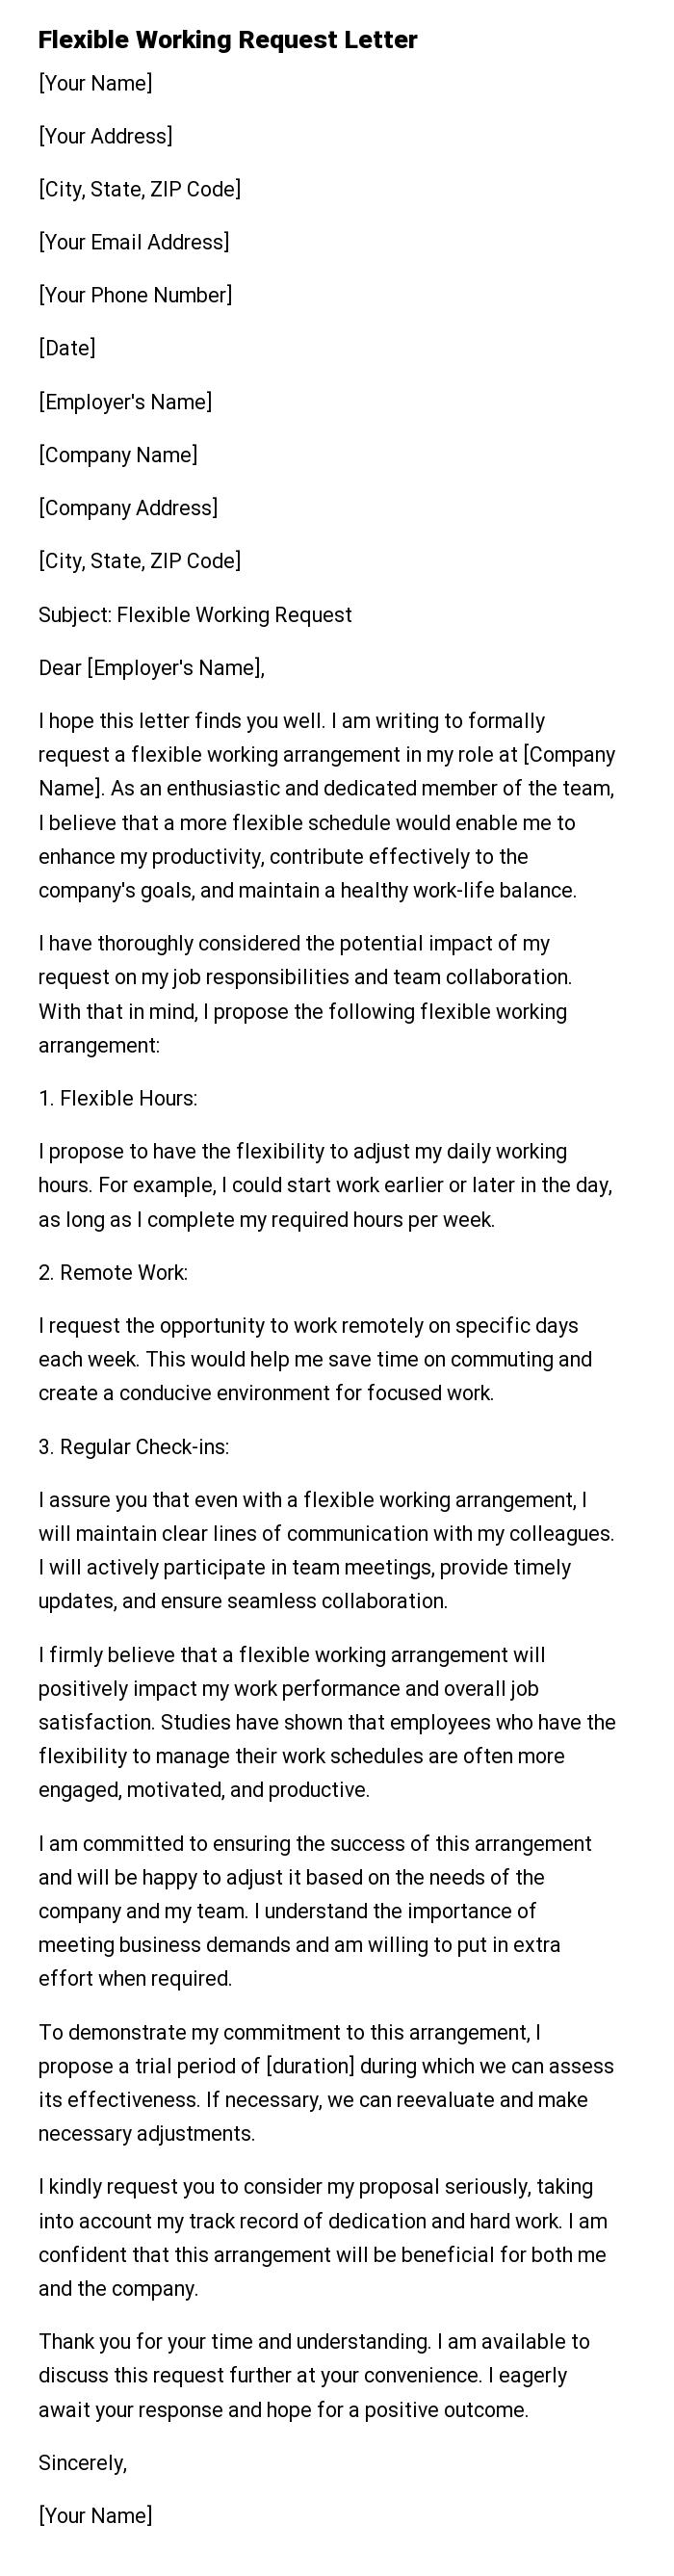 Flexible Working Request Letter